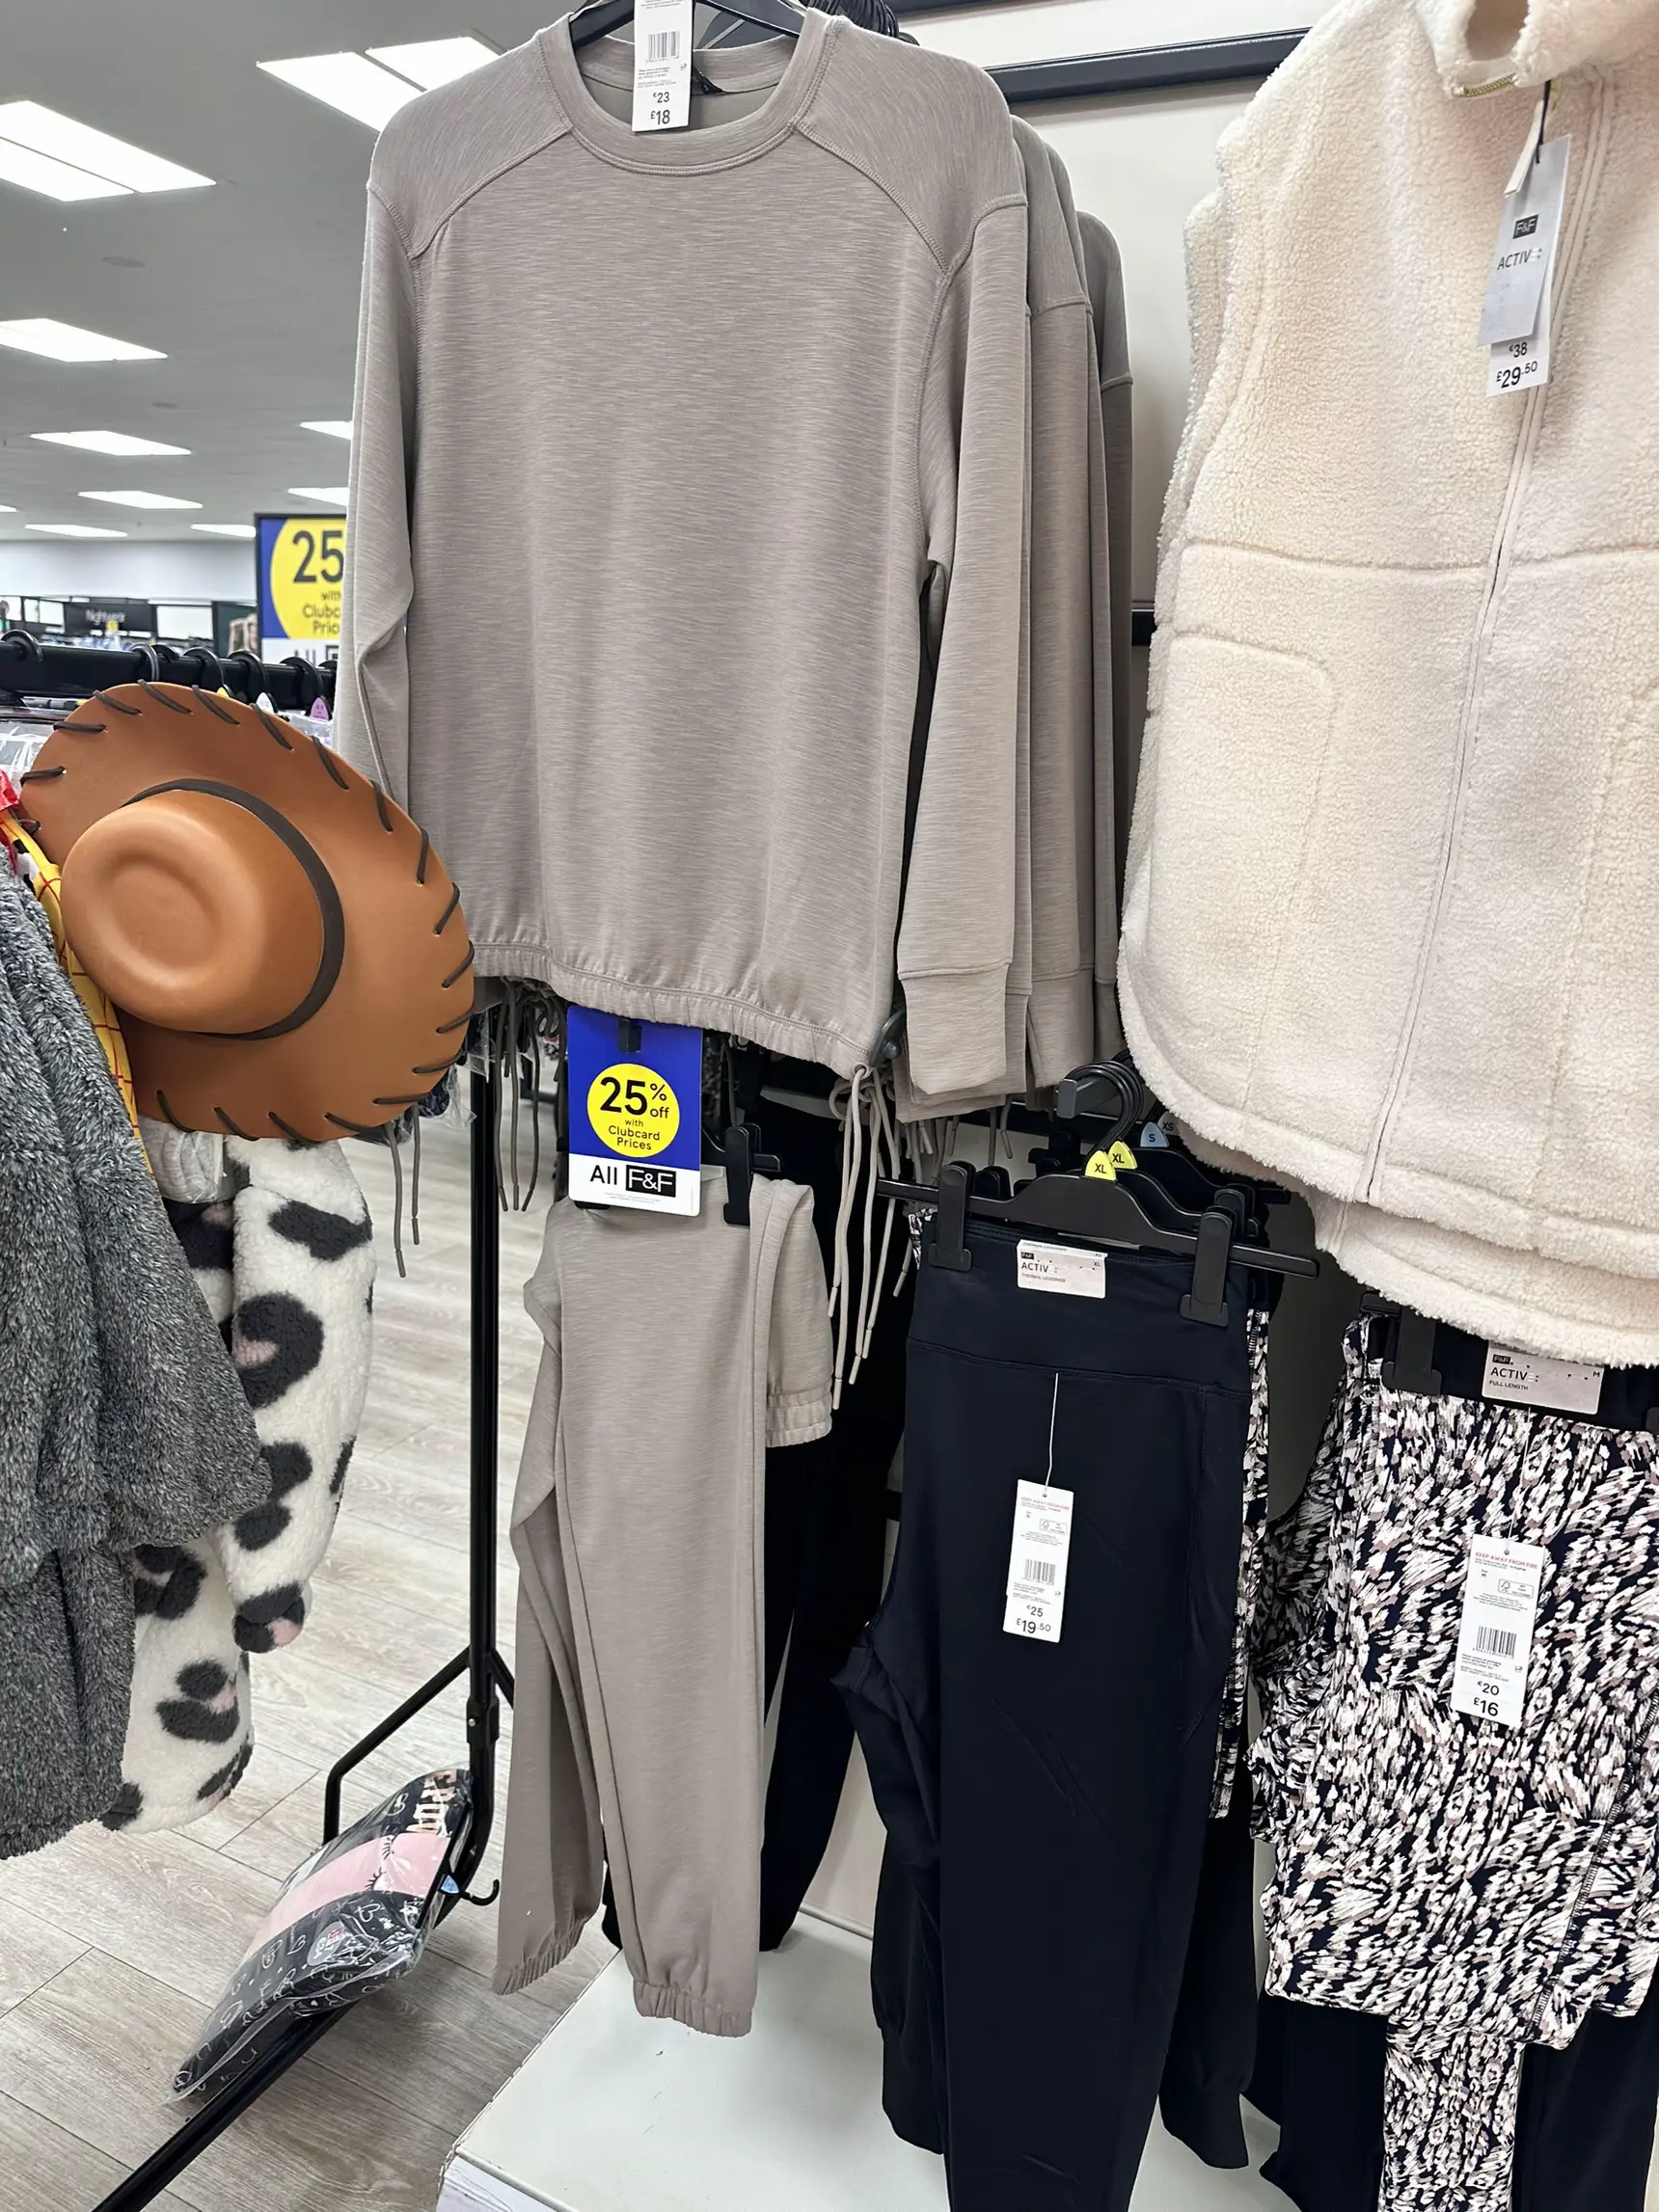 25% off Tesco F&F Clothing - with Clubcard - Instore Only - 1 Week Only at  Tesco